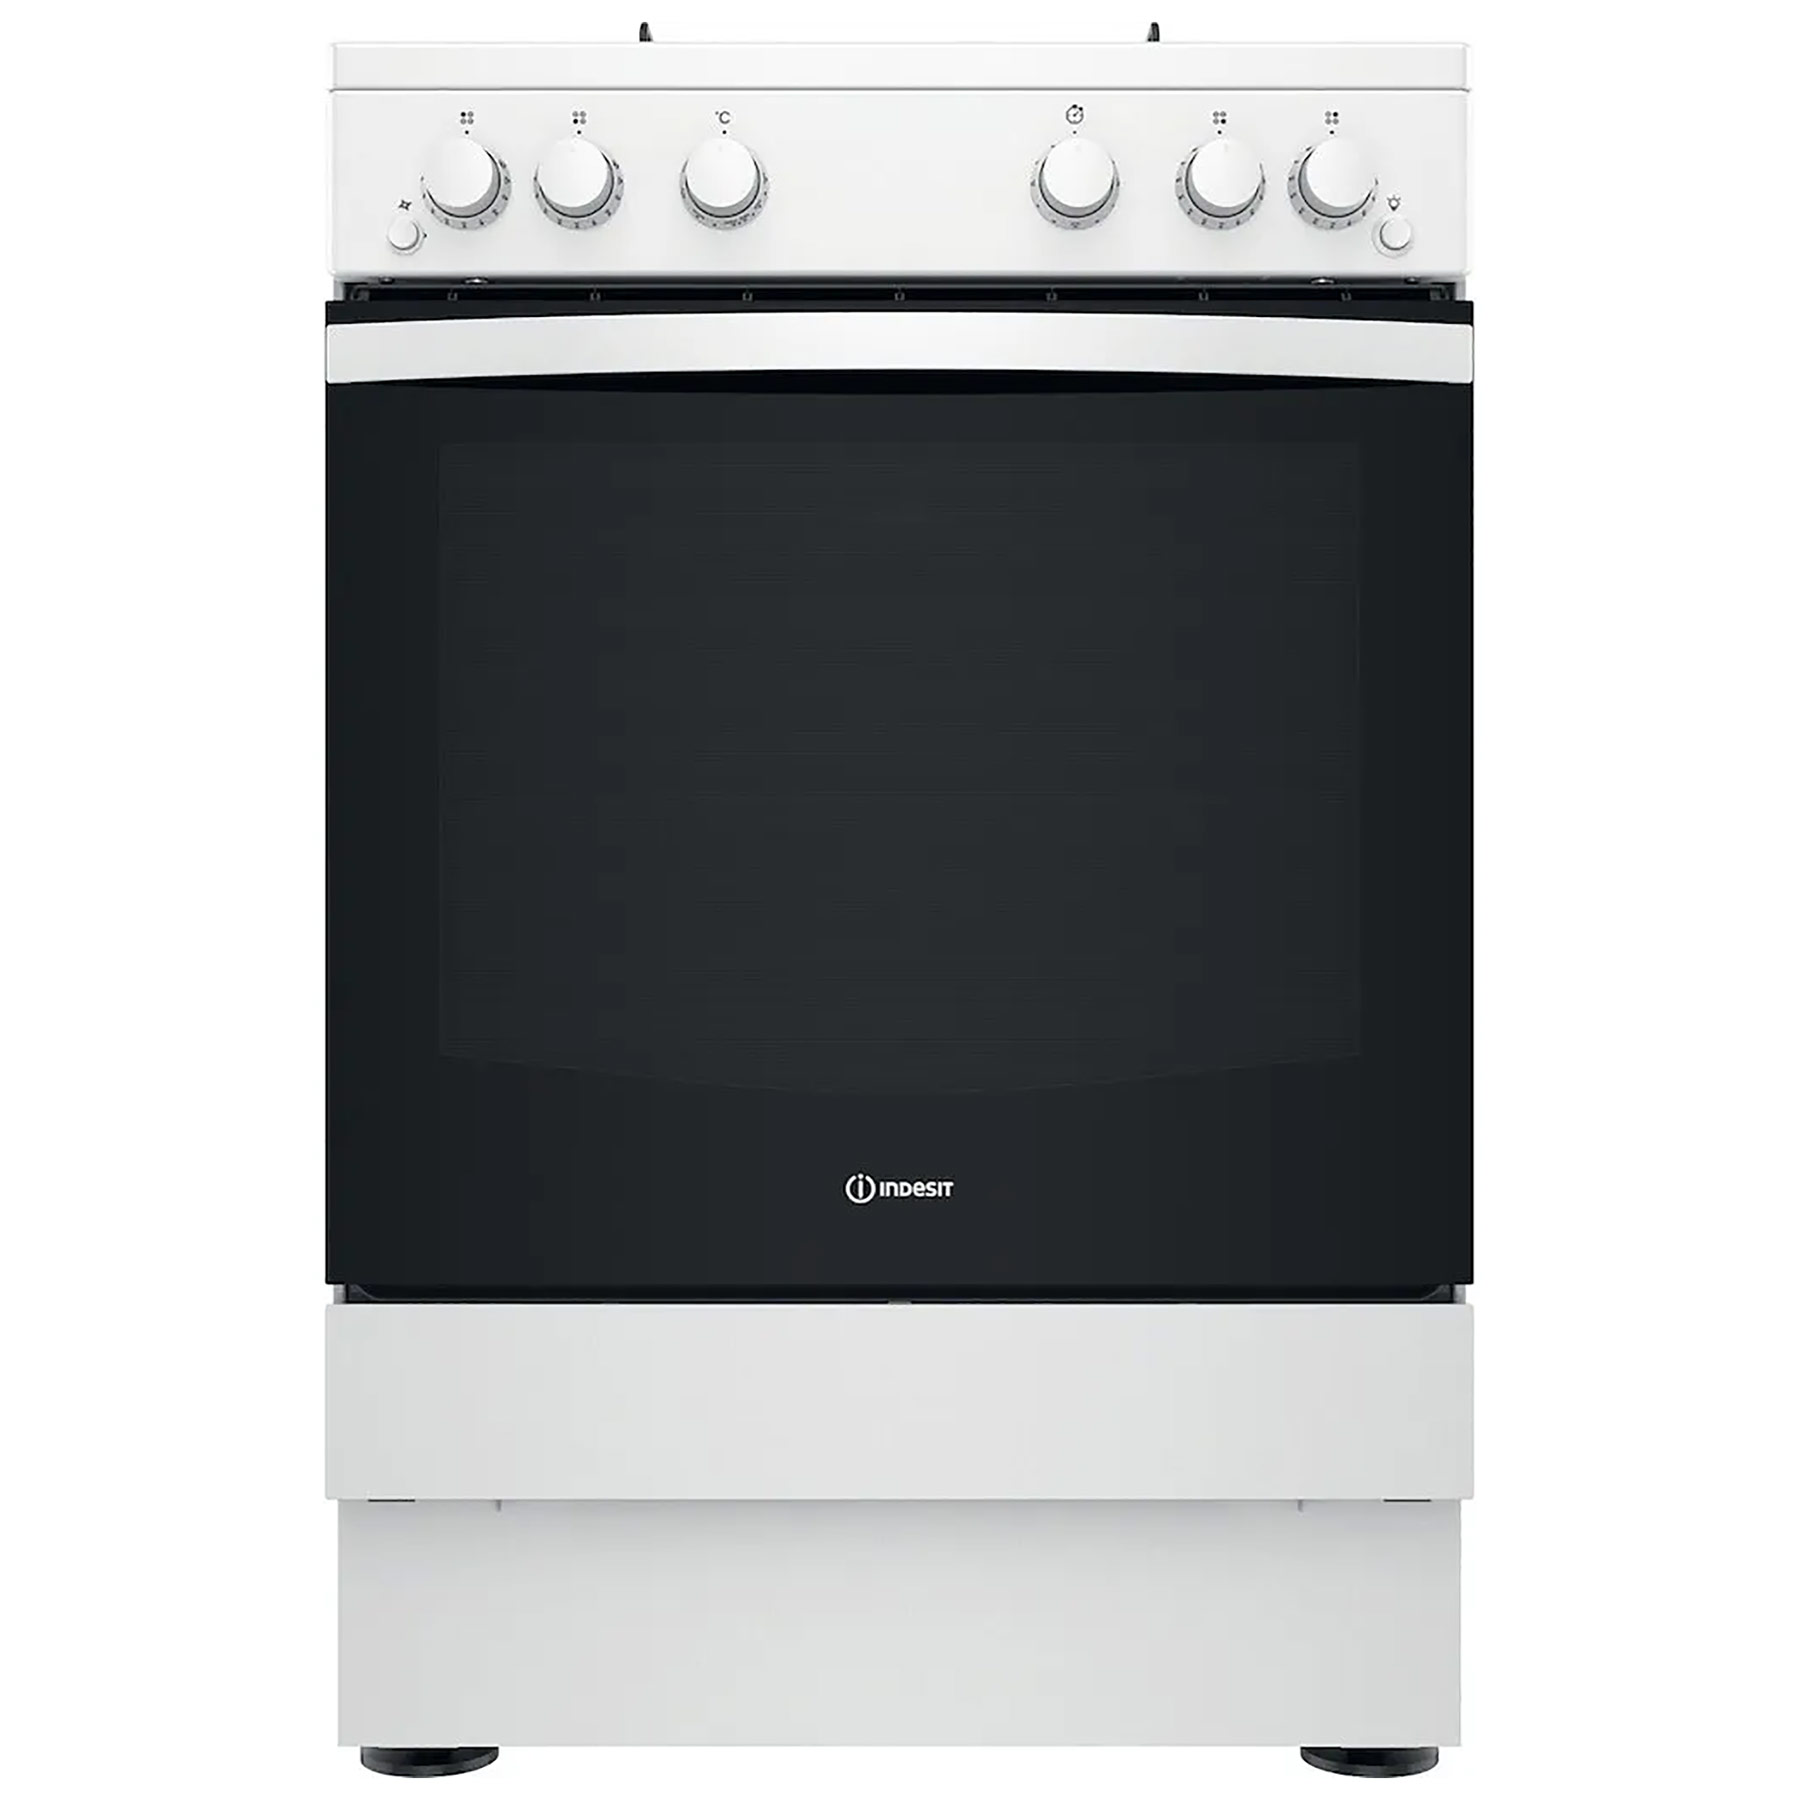 Image of Indesit IS67G1PMW 60cm Single Oven Gas Cooker in White 71 Litre